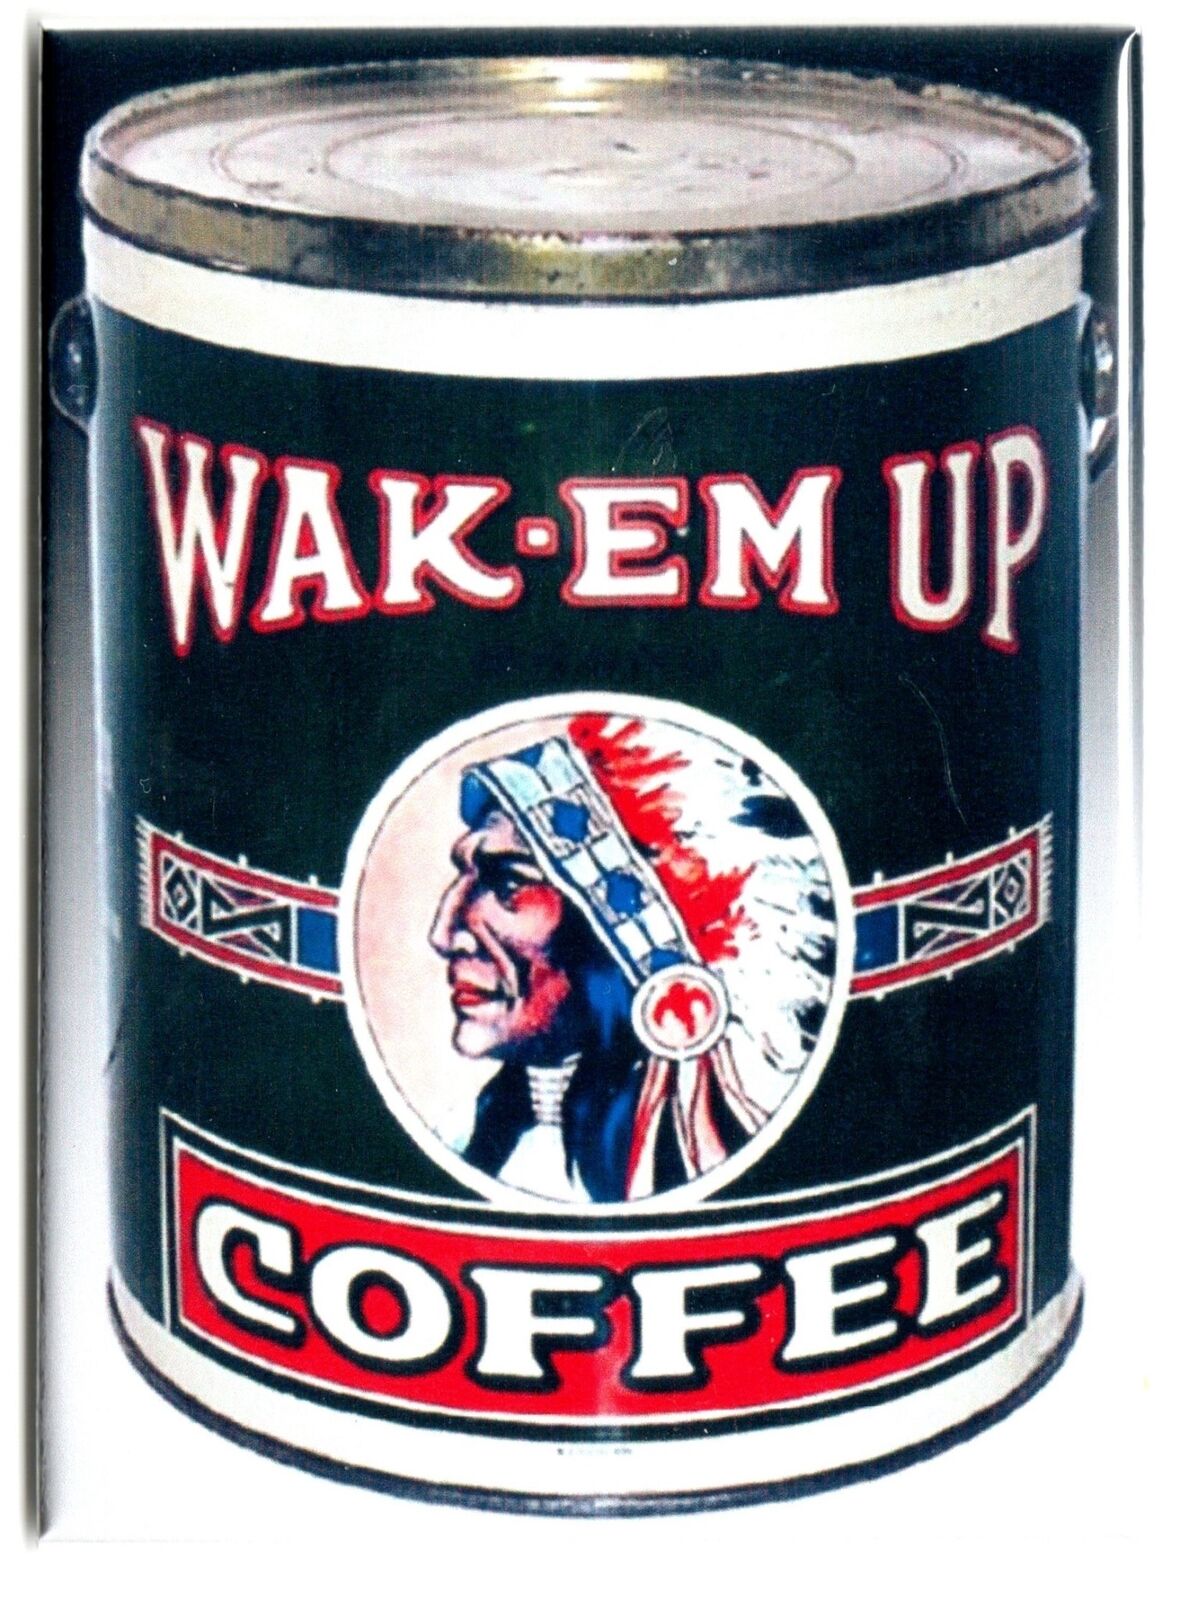 Old Wakem Up Coffee Tin label on Refrigerator Magnet BUY 3 GET 2 FREE MIX